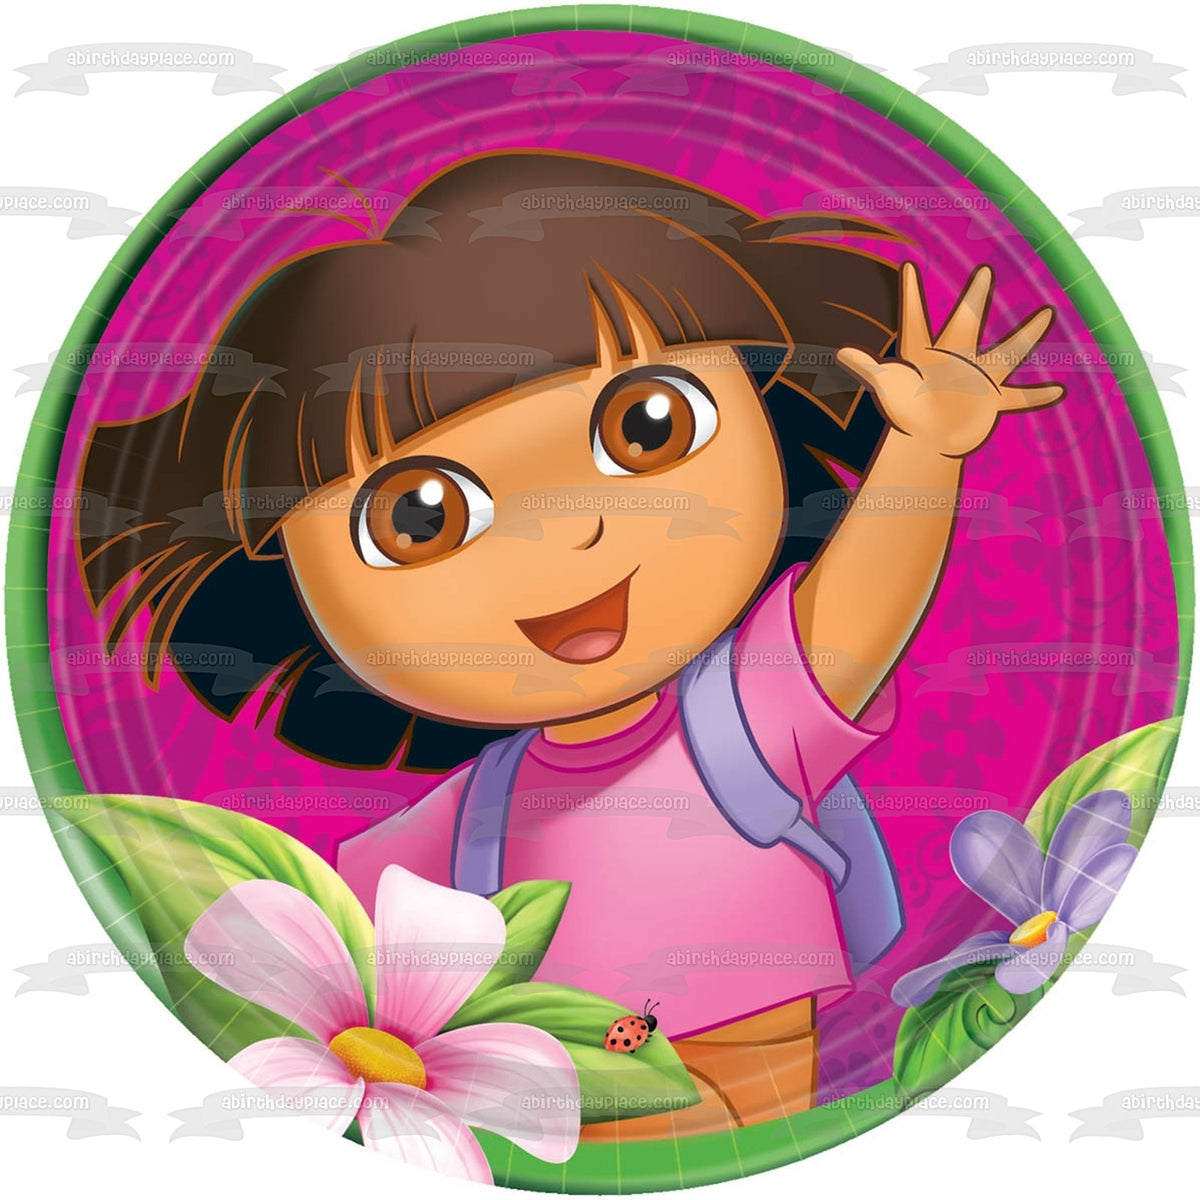 Dora the Explorer Flowers Edible Cake Topper Image ABPID00568 – A ...